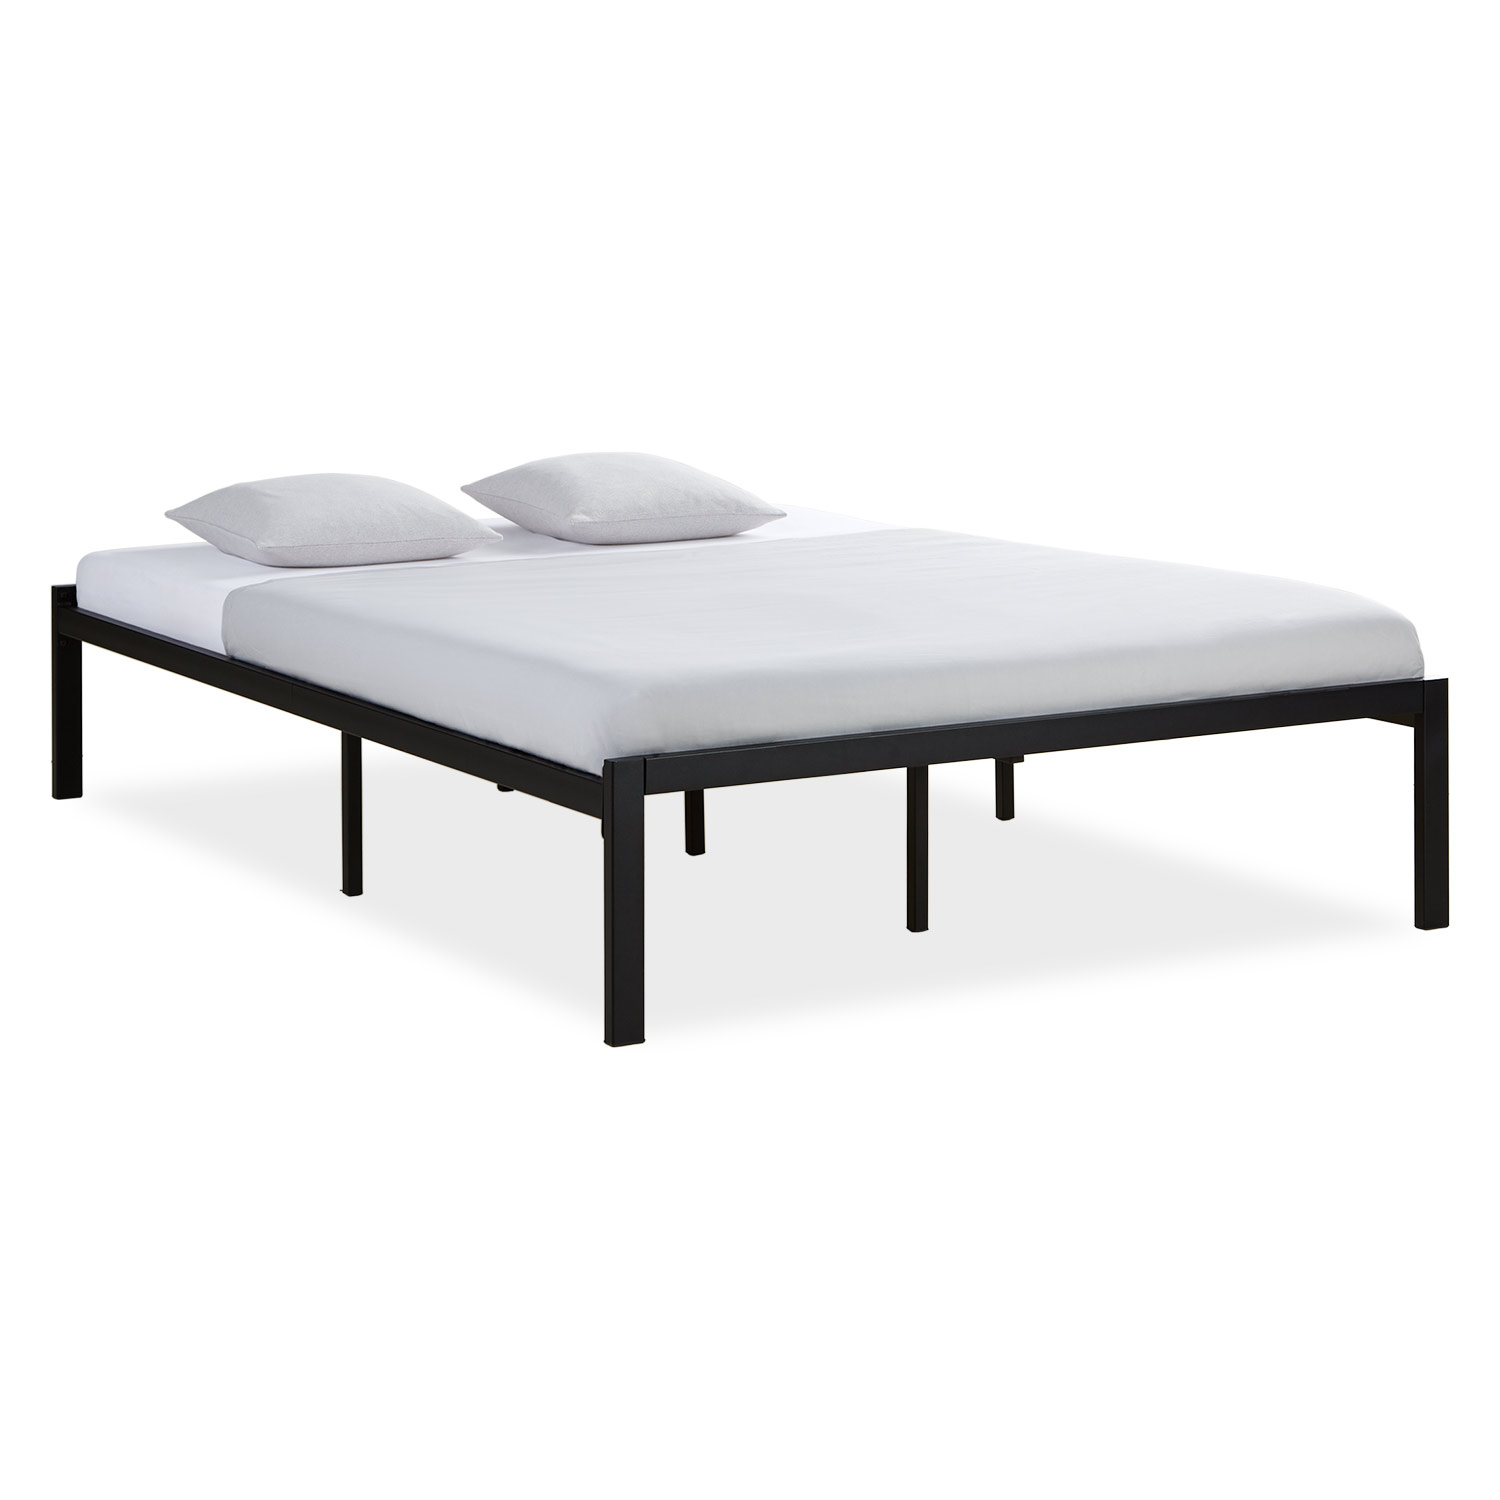 Solid Metal Bed with Mattress 140x200 cm Slatts Double Bed Black Futon Bed Platform Bed Frame Guest Bed